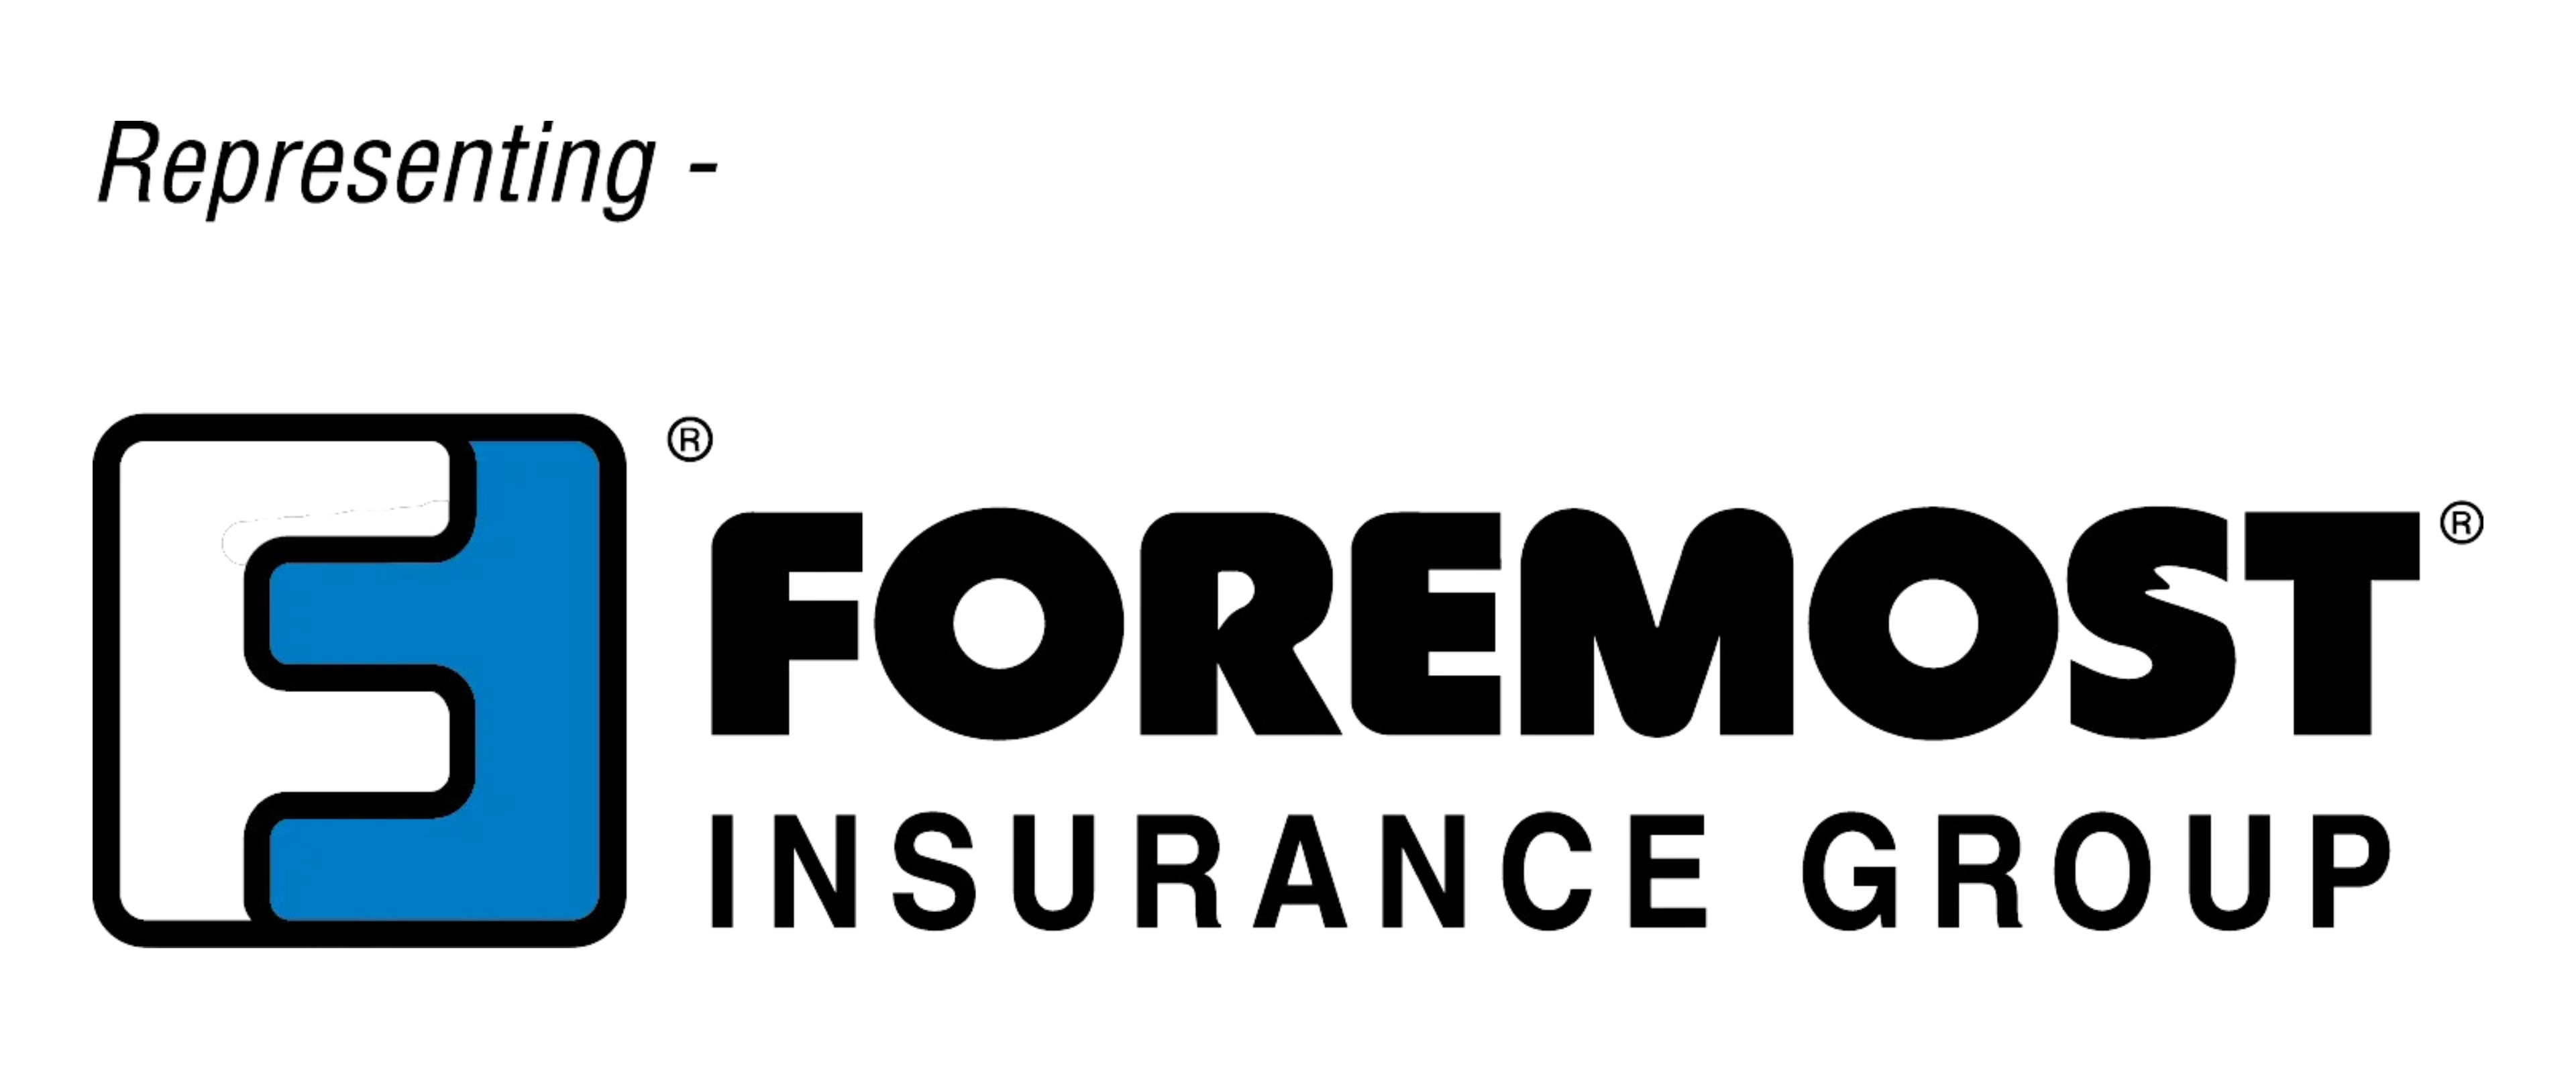 logo for the company Foremost Insurance Group